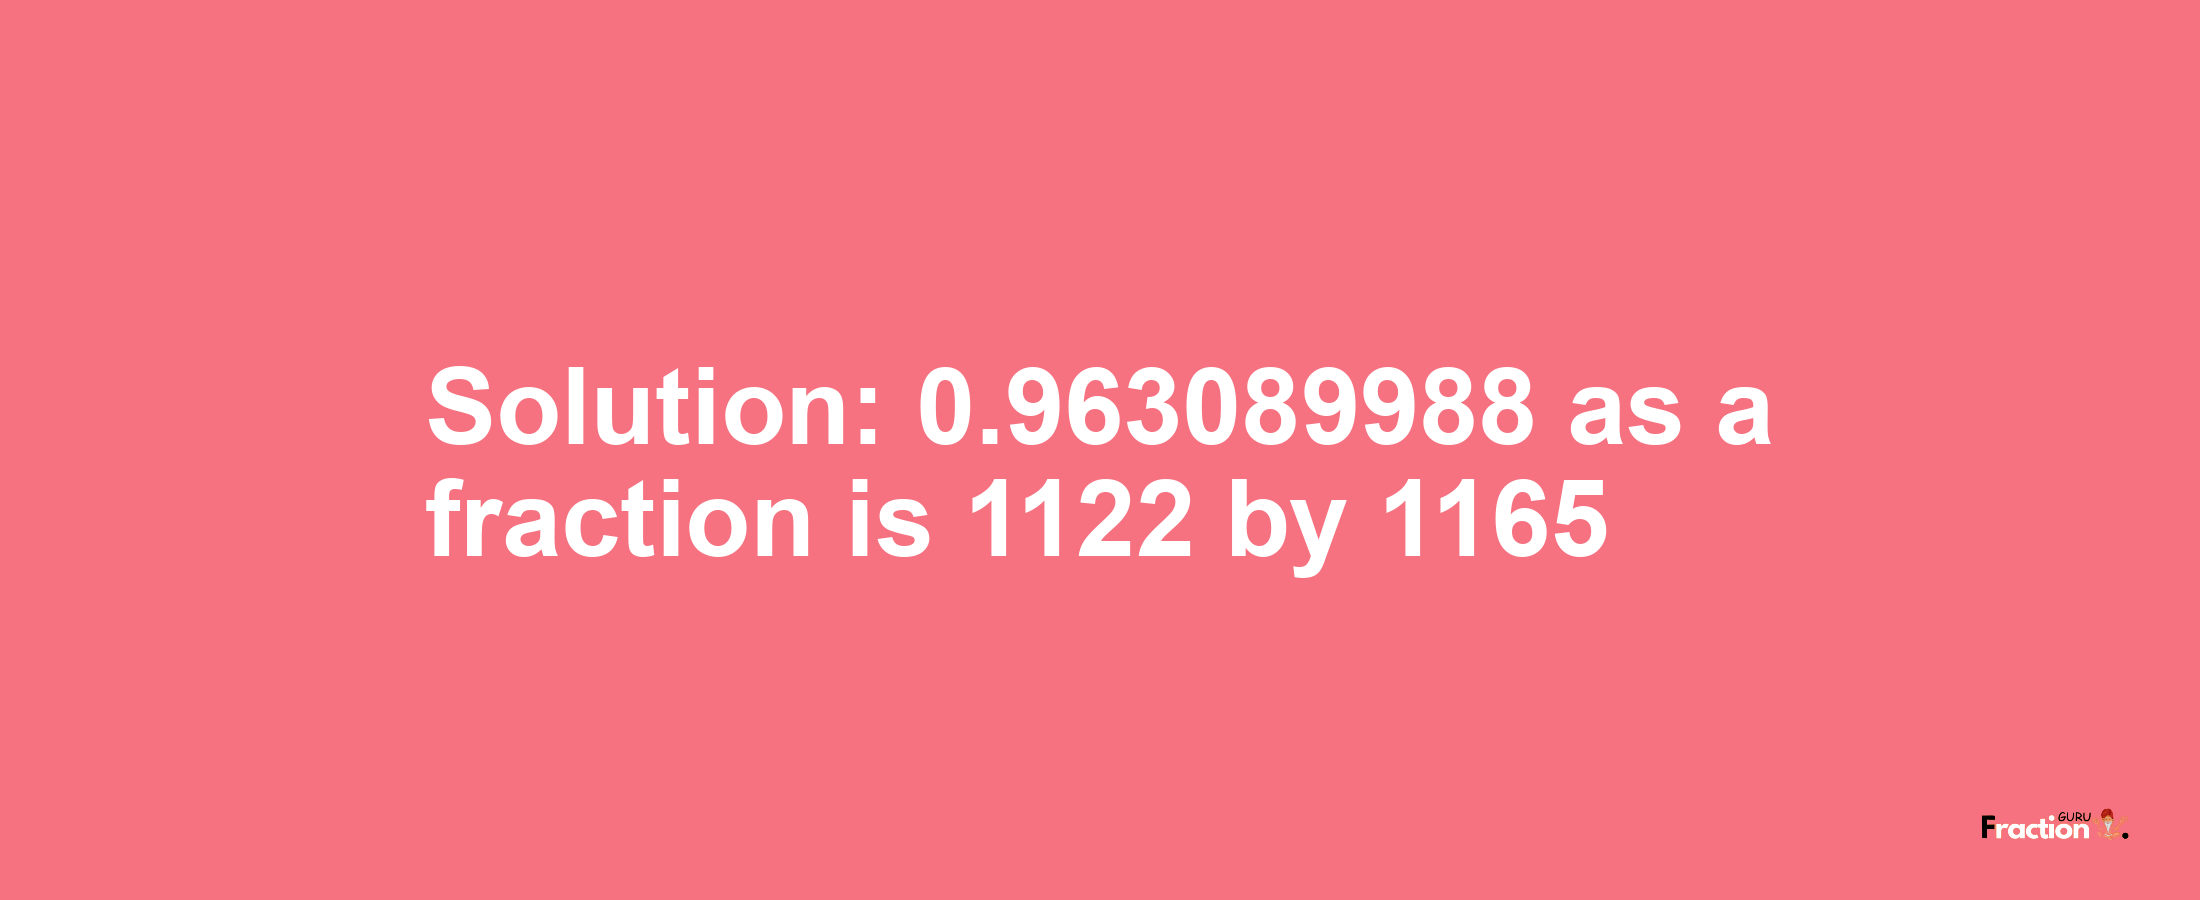 Solution:0.963089988 as a fraction is 1122/1165